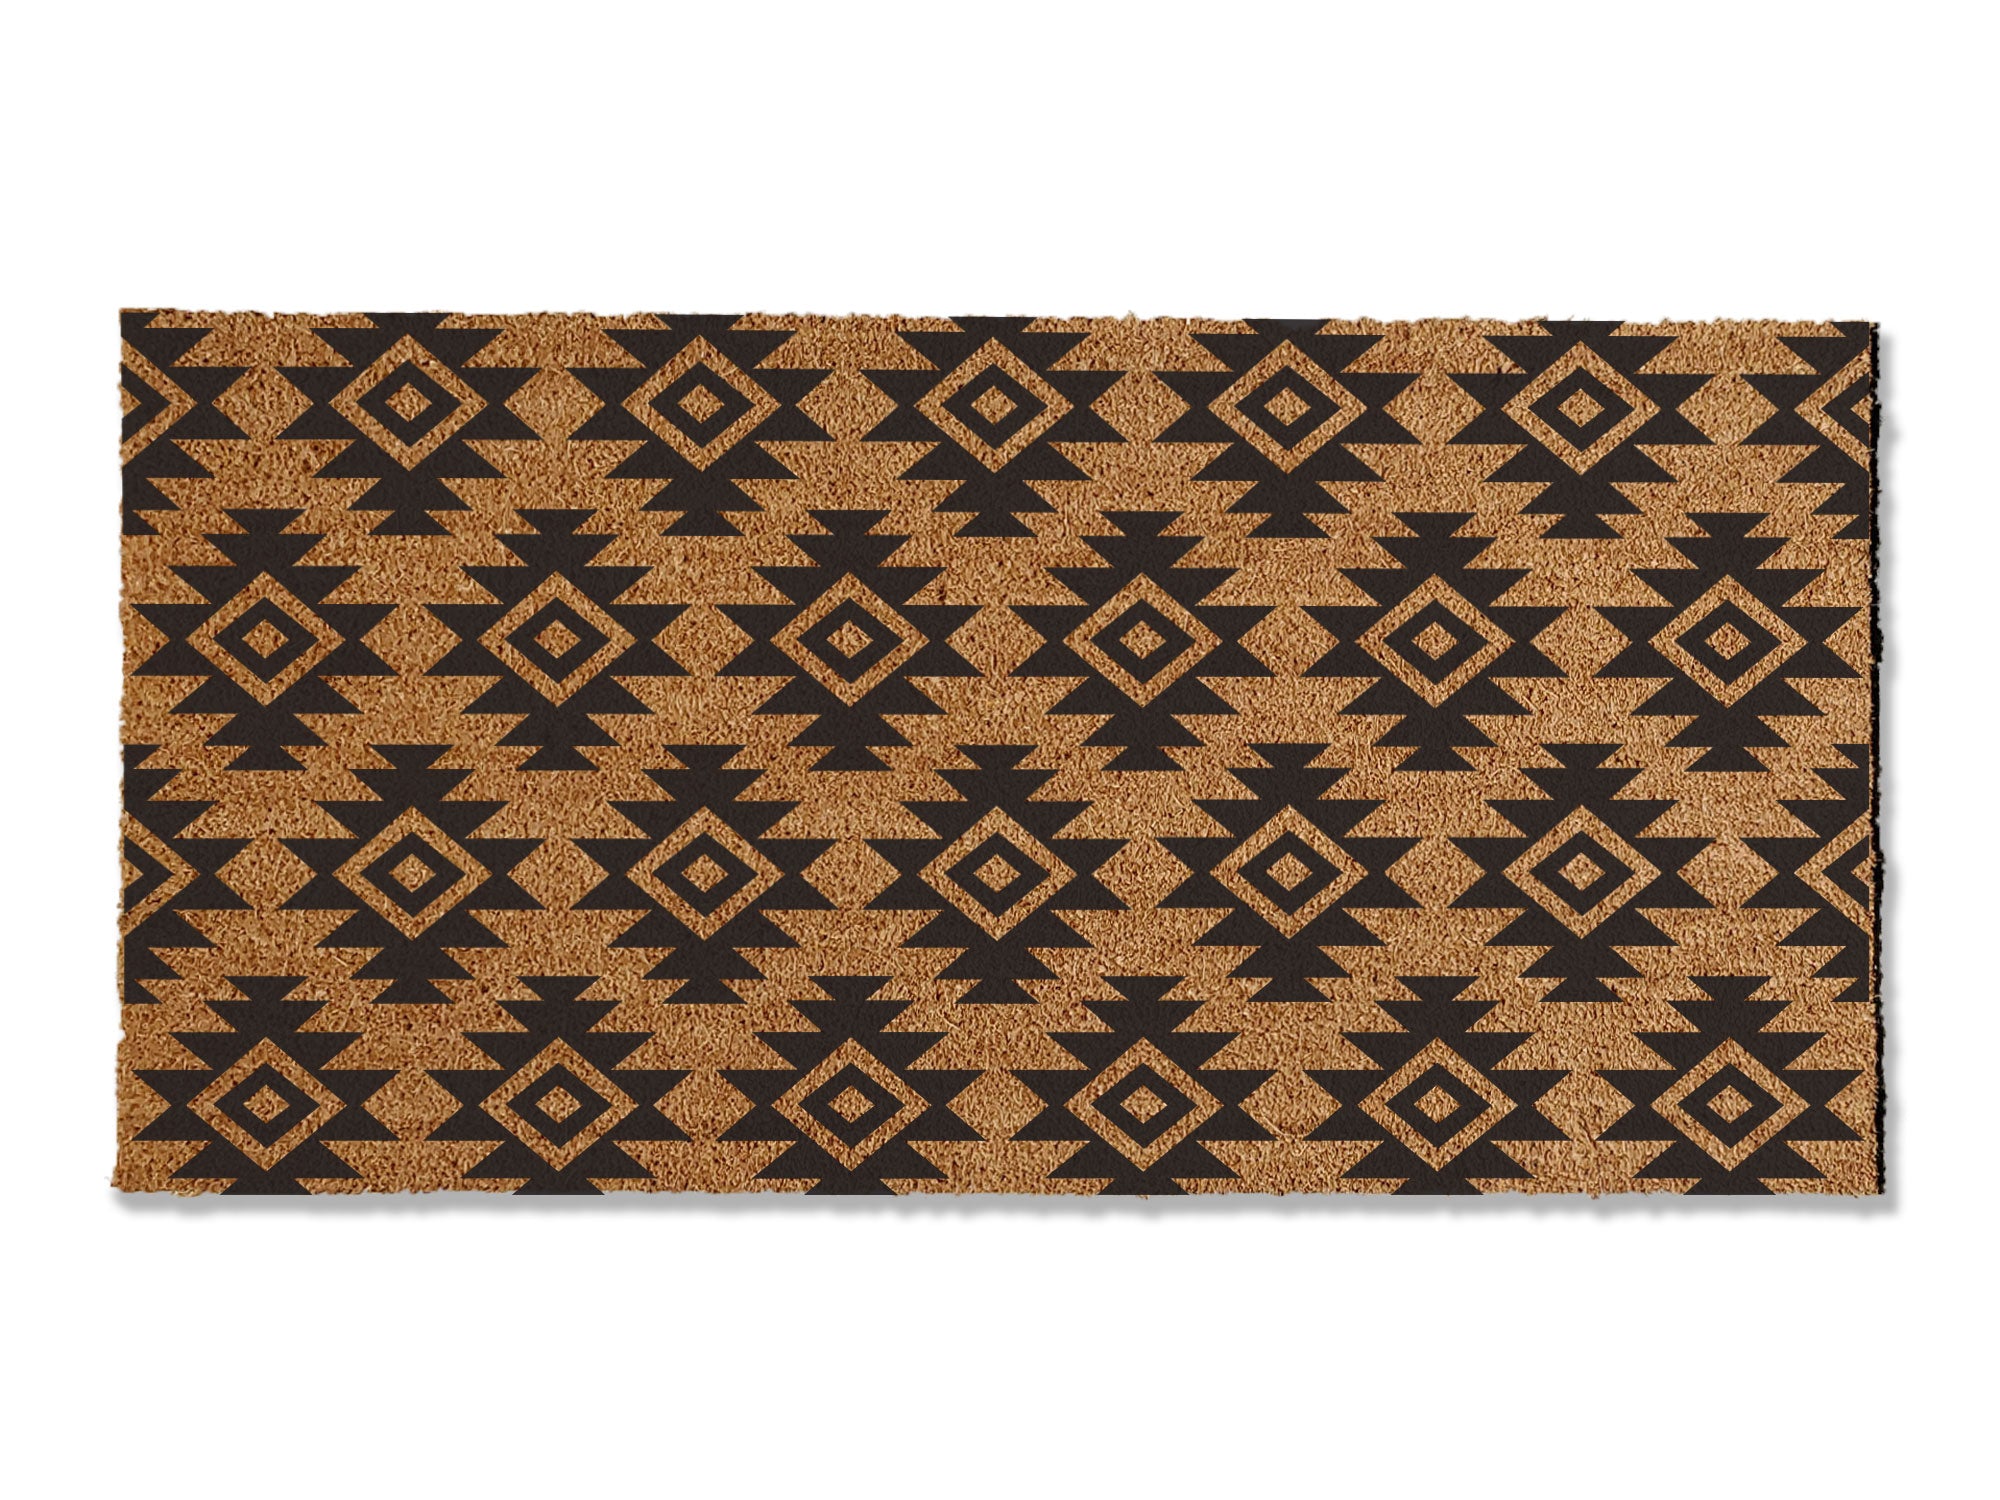 A coir doormat that is 36 inches by 72 inches and has a geometric aztec print painted on it.